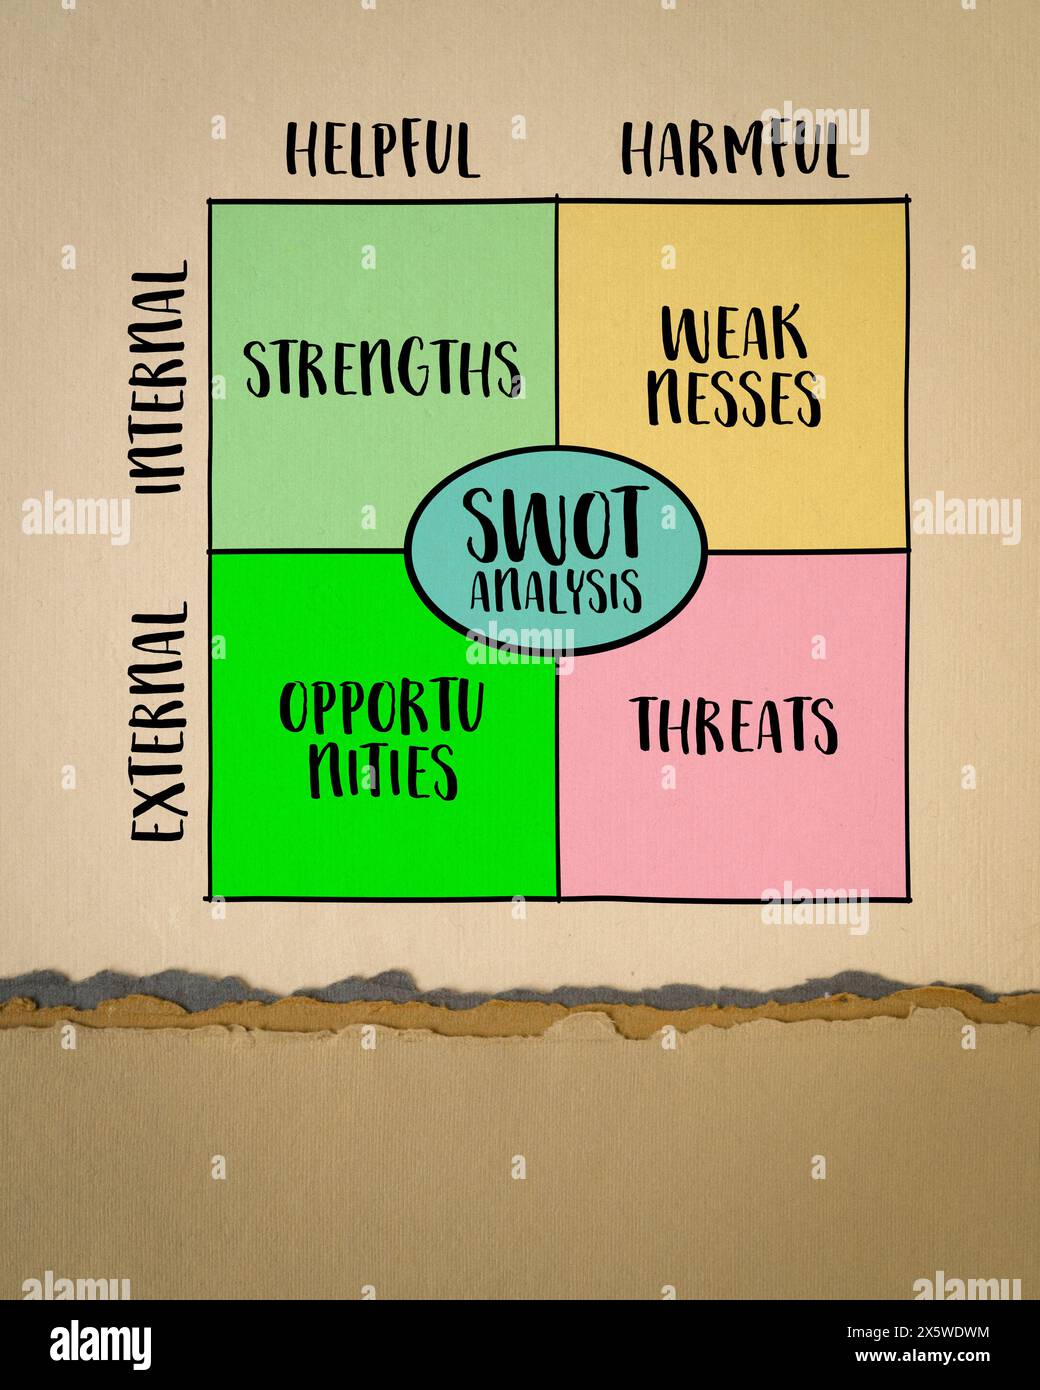 SWOT (strengths, weaknesses, opportunities, threats) analysis, project management concept, diagram sketch on art paper Stock Photo